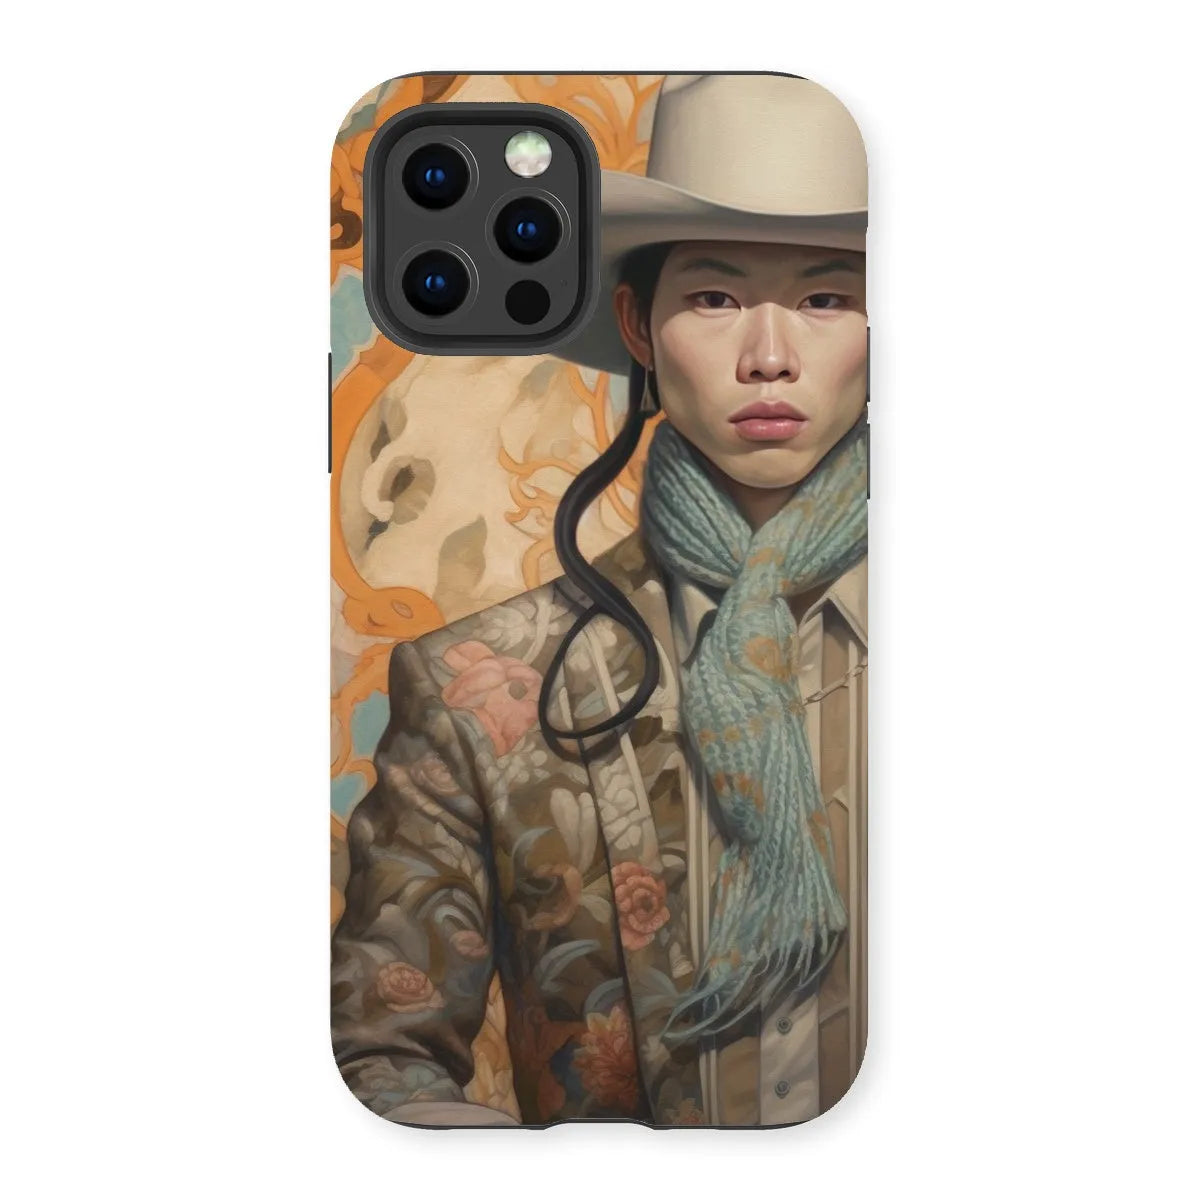 Baihu The Gay Cowboy - Gay Aesthetic Art Phone Case - Iphone 13 Pro / Matte - Mobile Phone Cases - Aesthetic Art